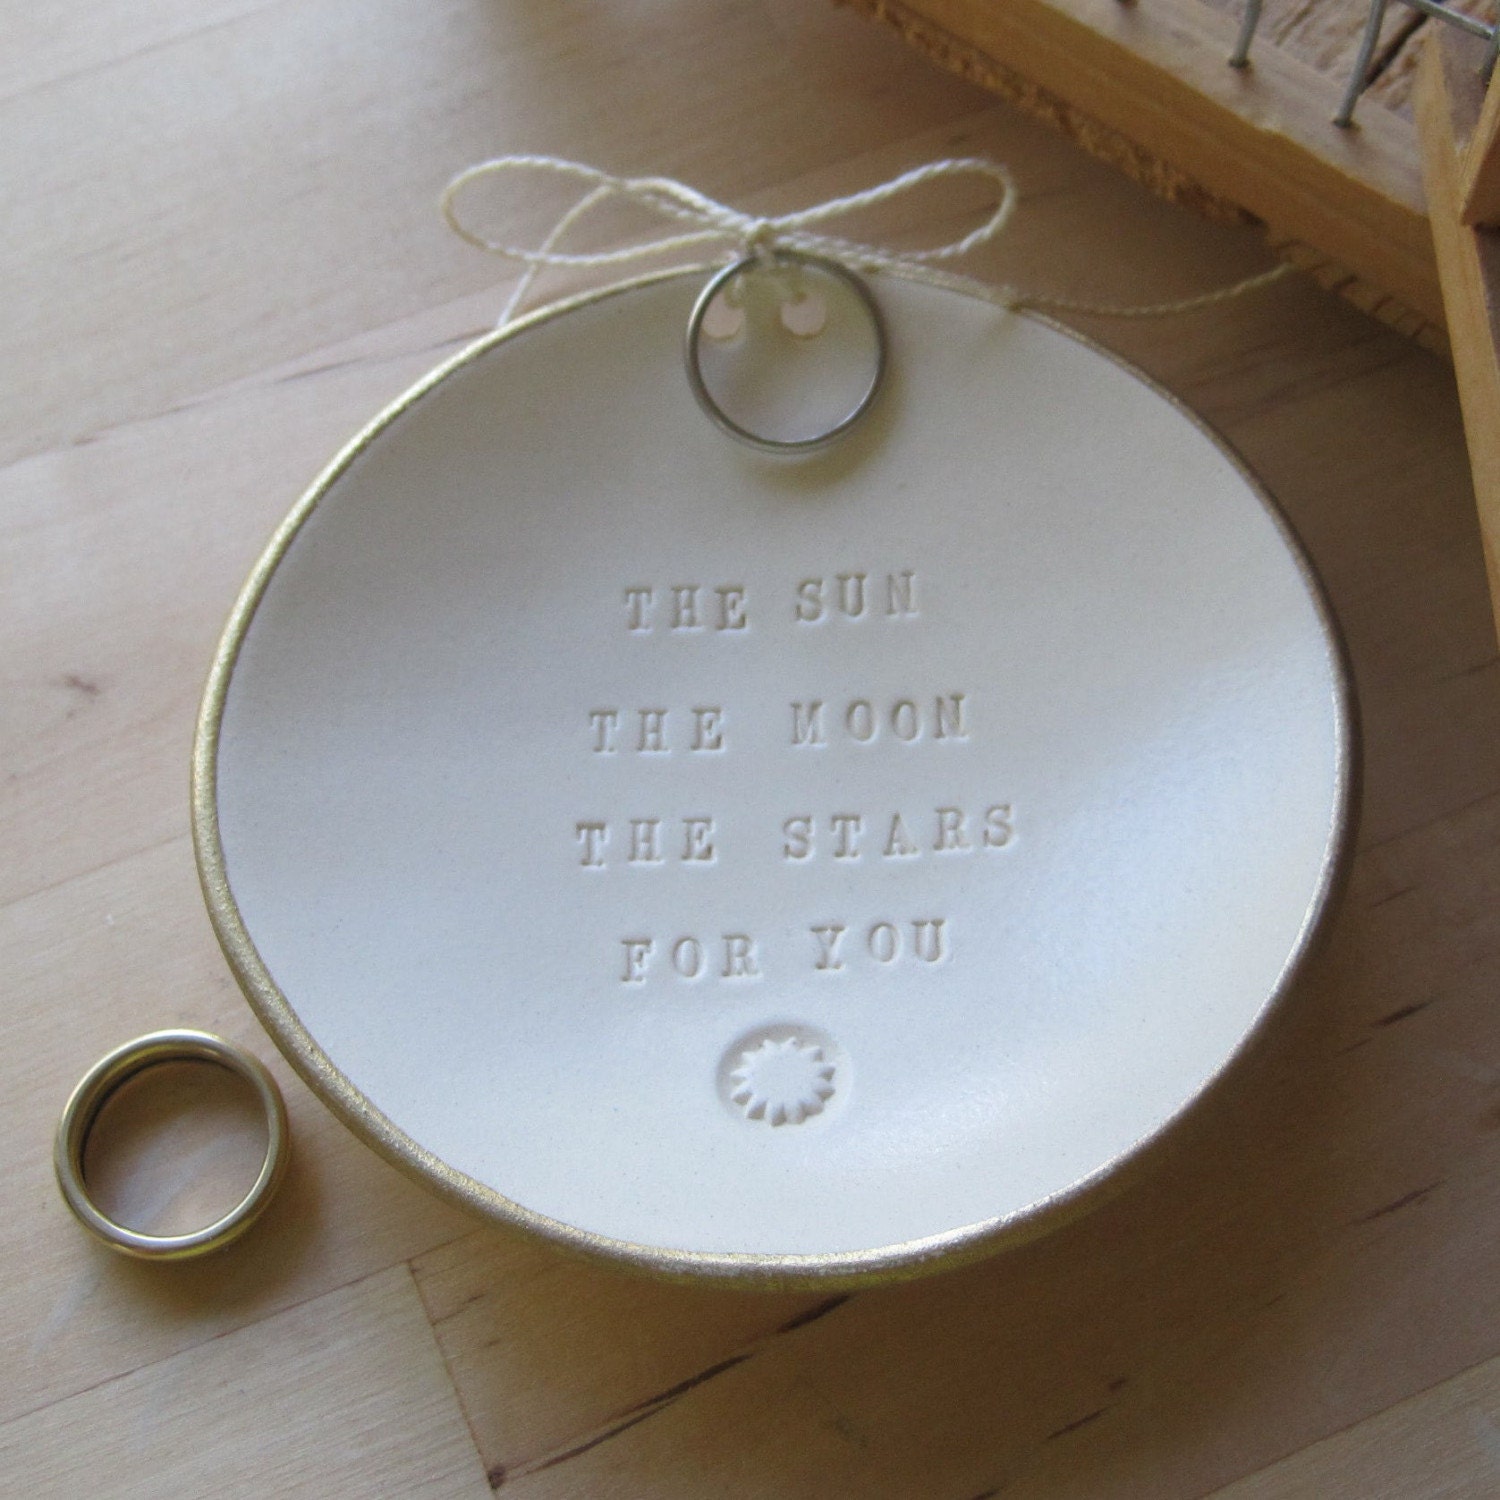 as seen in Martha Stewart Weddings Magazine THE SUN THE MOON THE STARS FOR YOU ring bearer bowl (TM) with gold leaf edge by Paloma's Nest- wedding or commitment ceremony